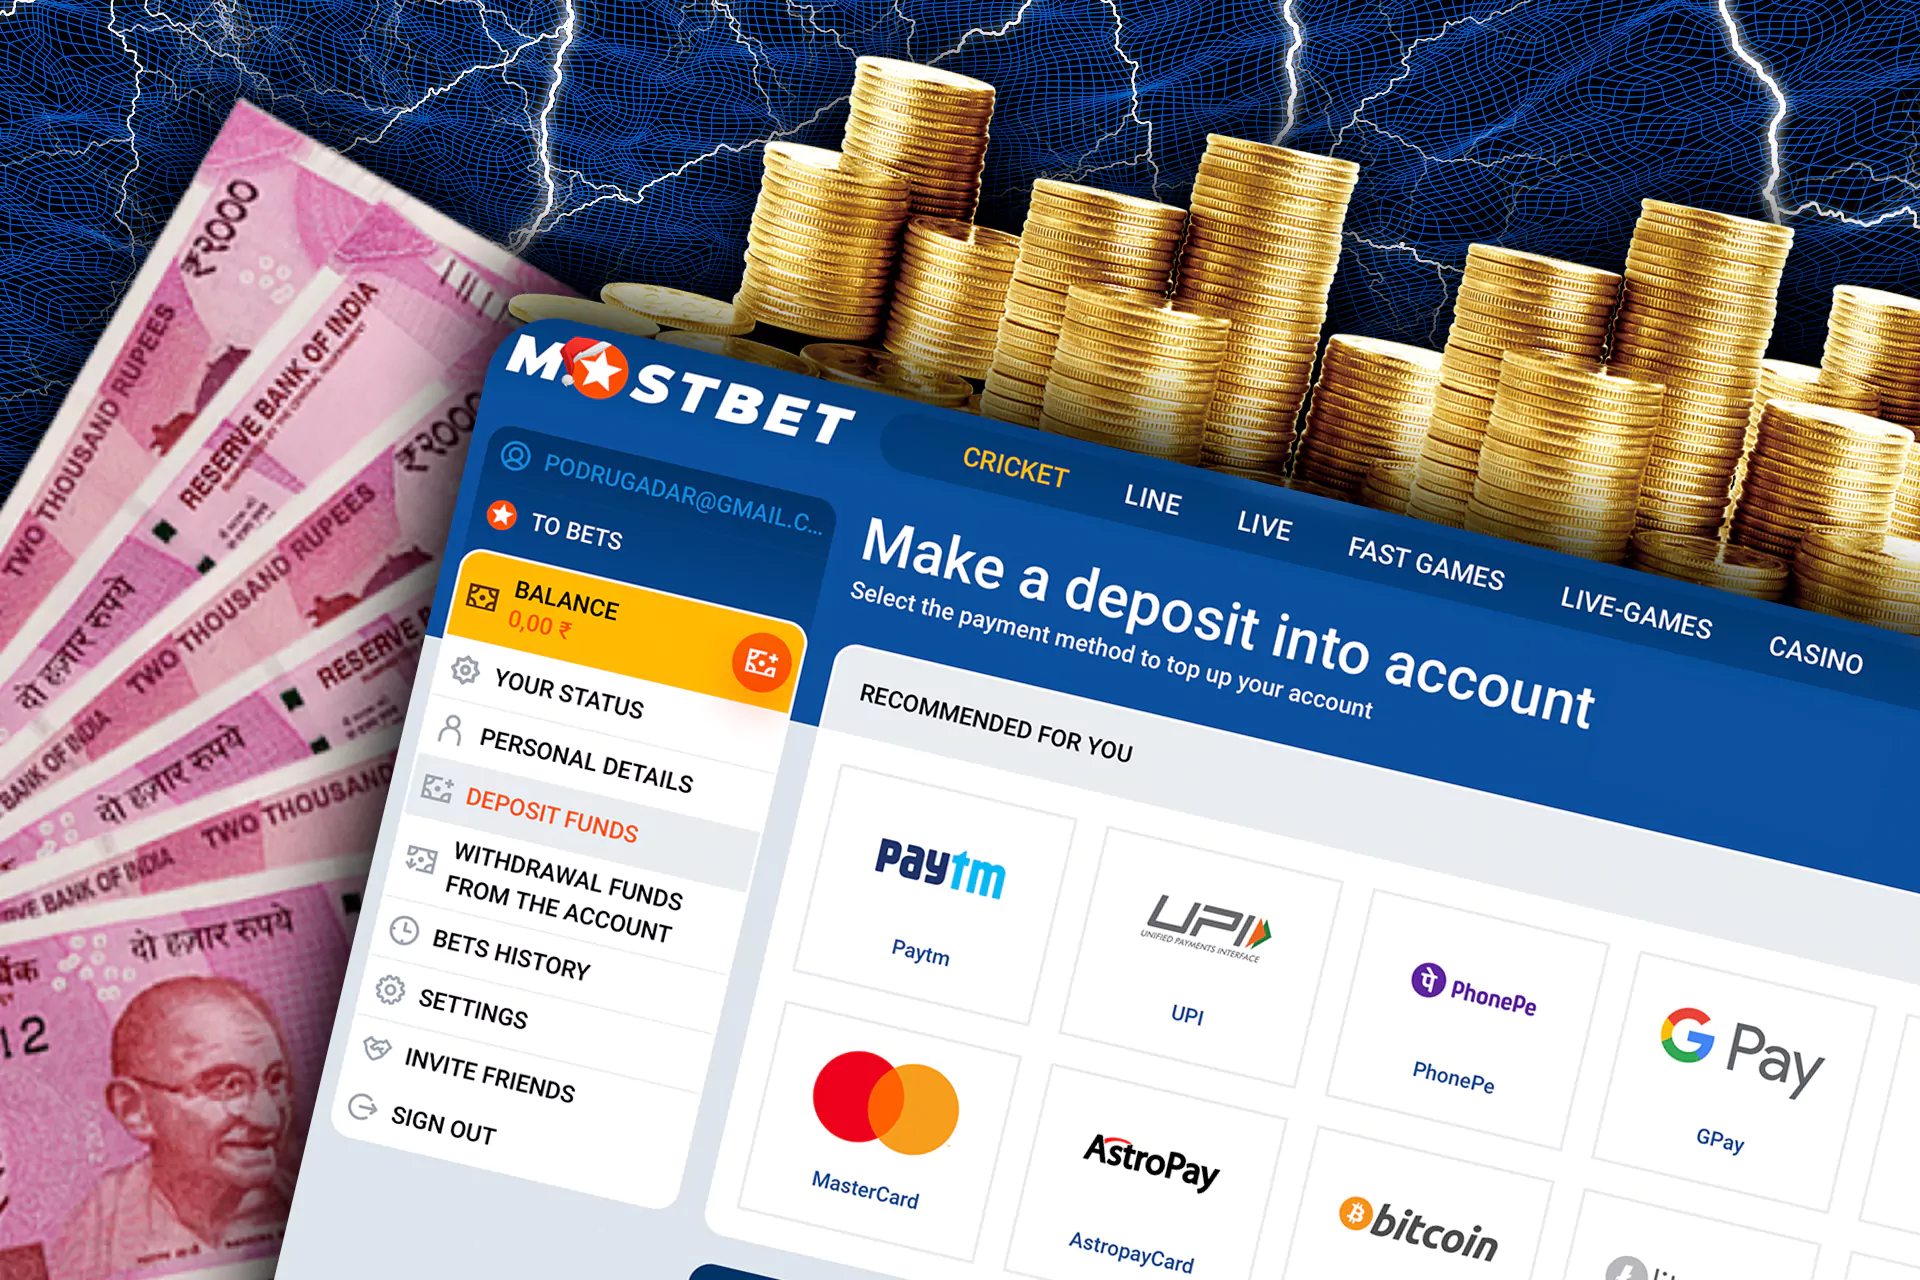 Study the payment methods available at Mostbet.